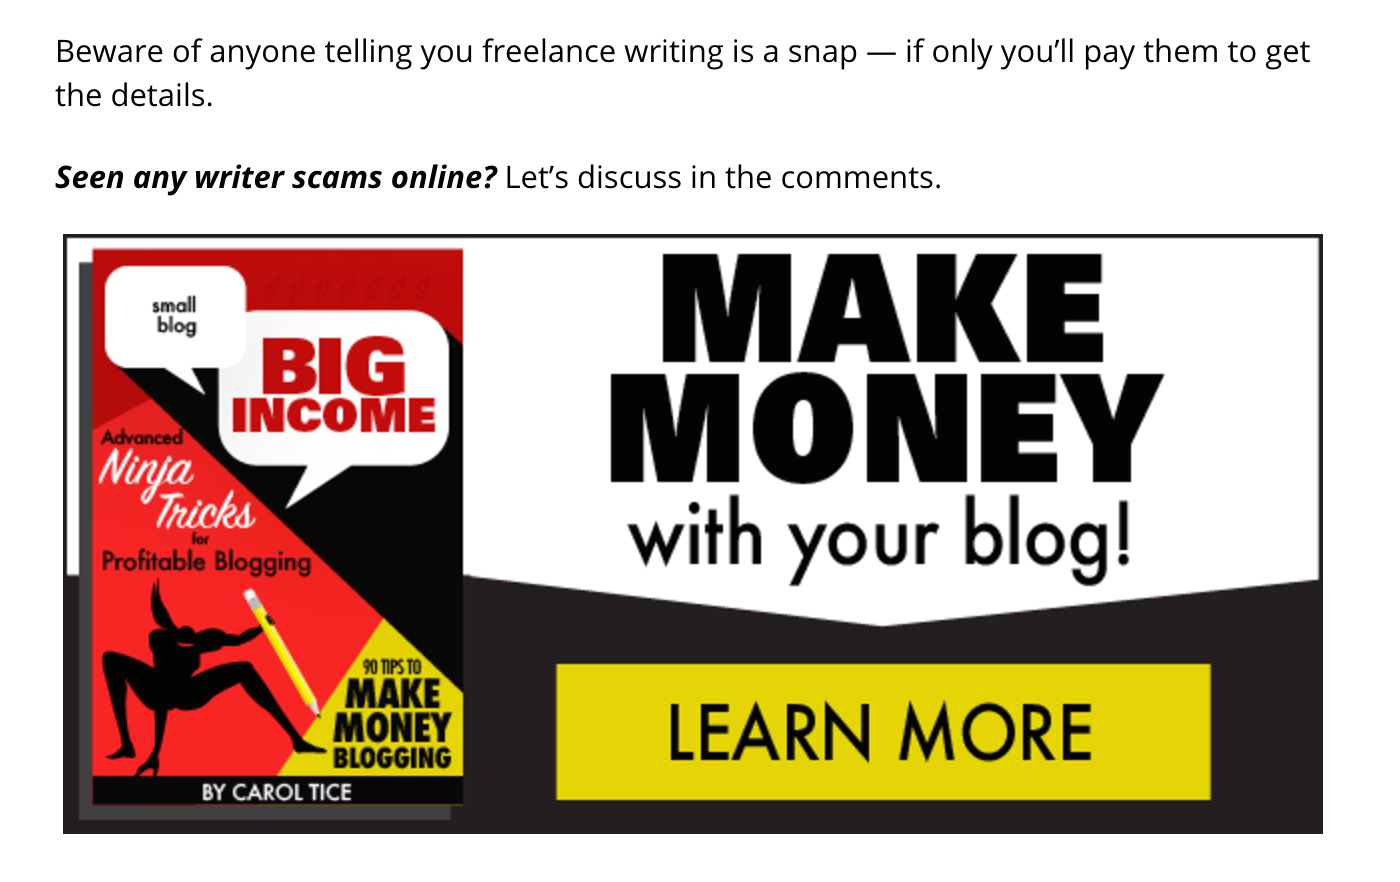 Here’s Carol Tice from Make A Living Writing - make money with your blog - with learn more CTA